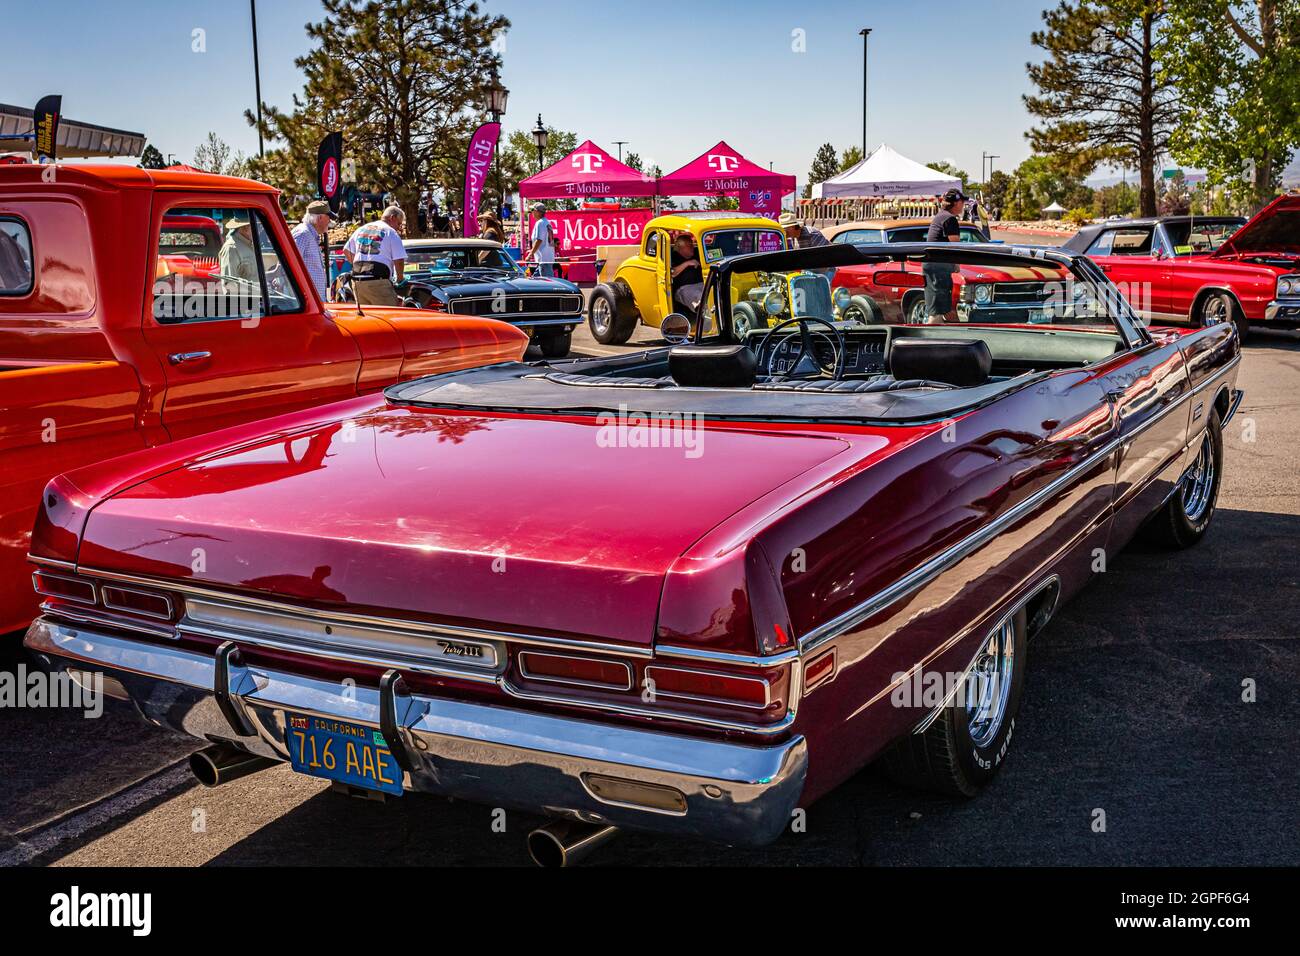 Reno, NV - August 4, 2021: 1969 Plymouth Fury III Convertible at a local car show. Stock Photo